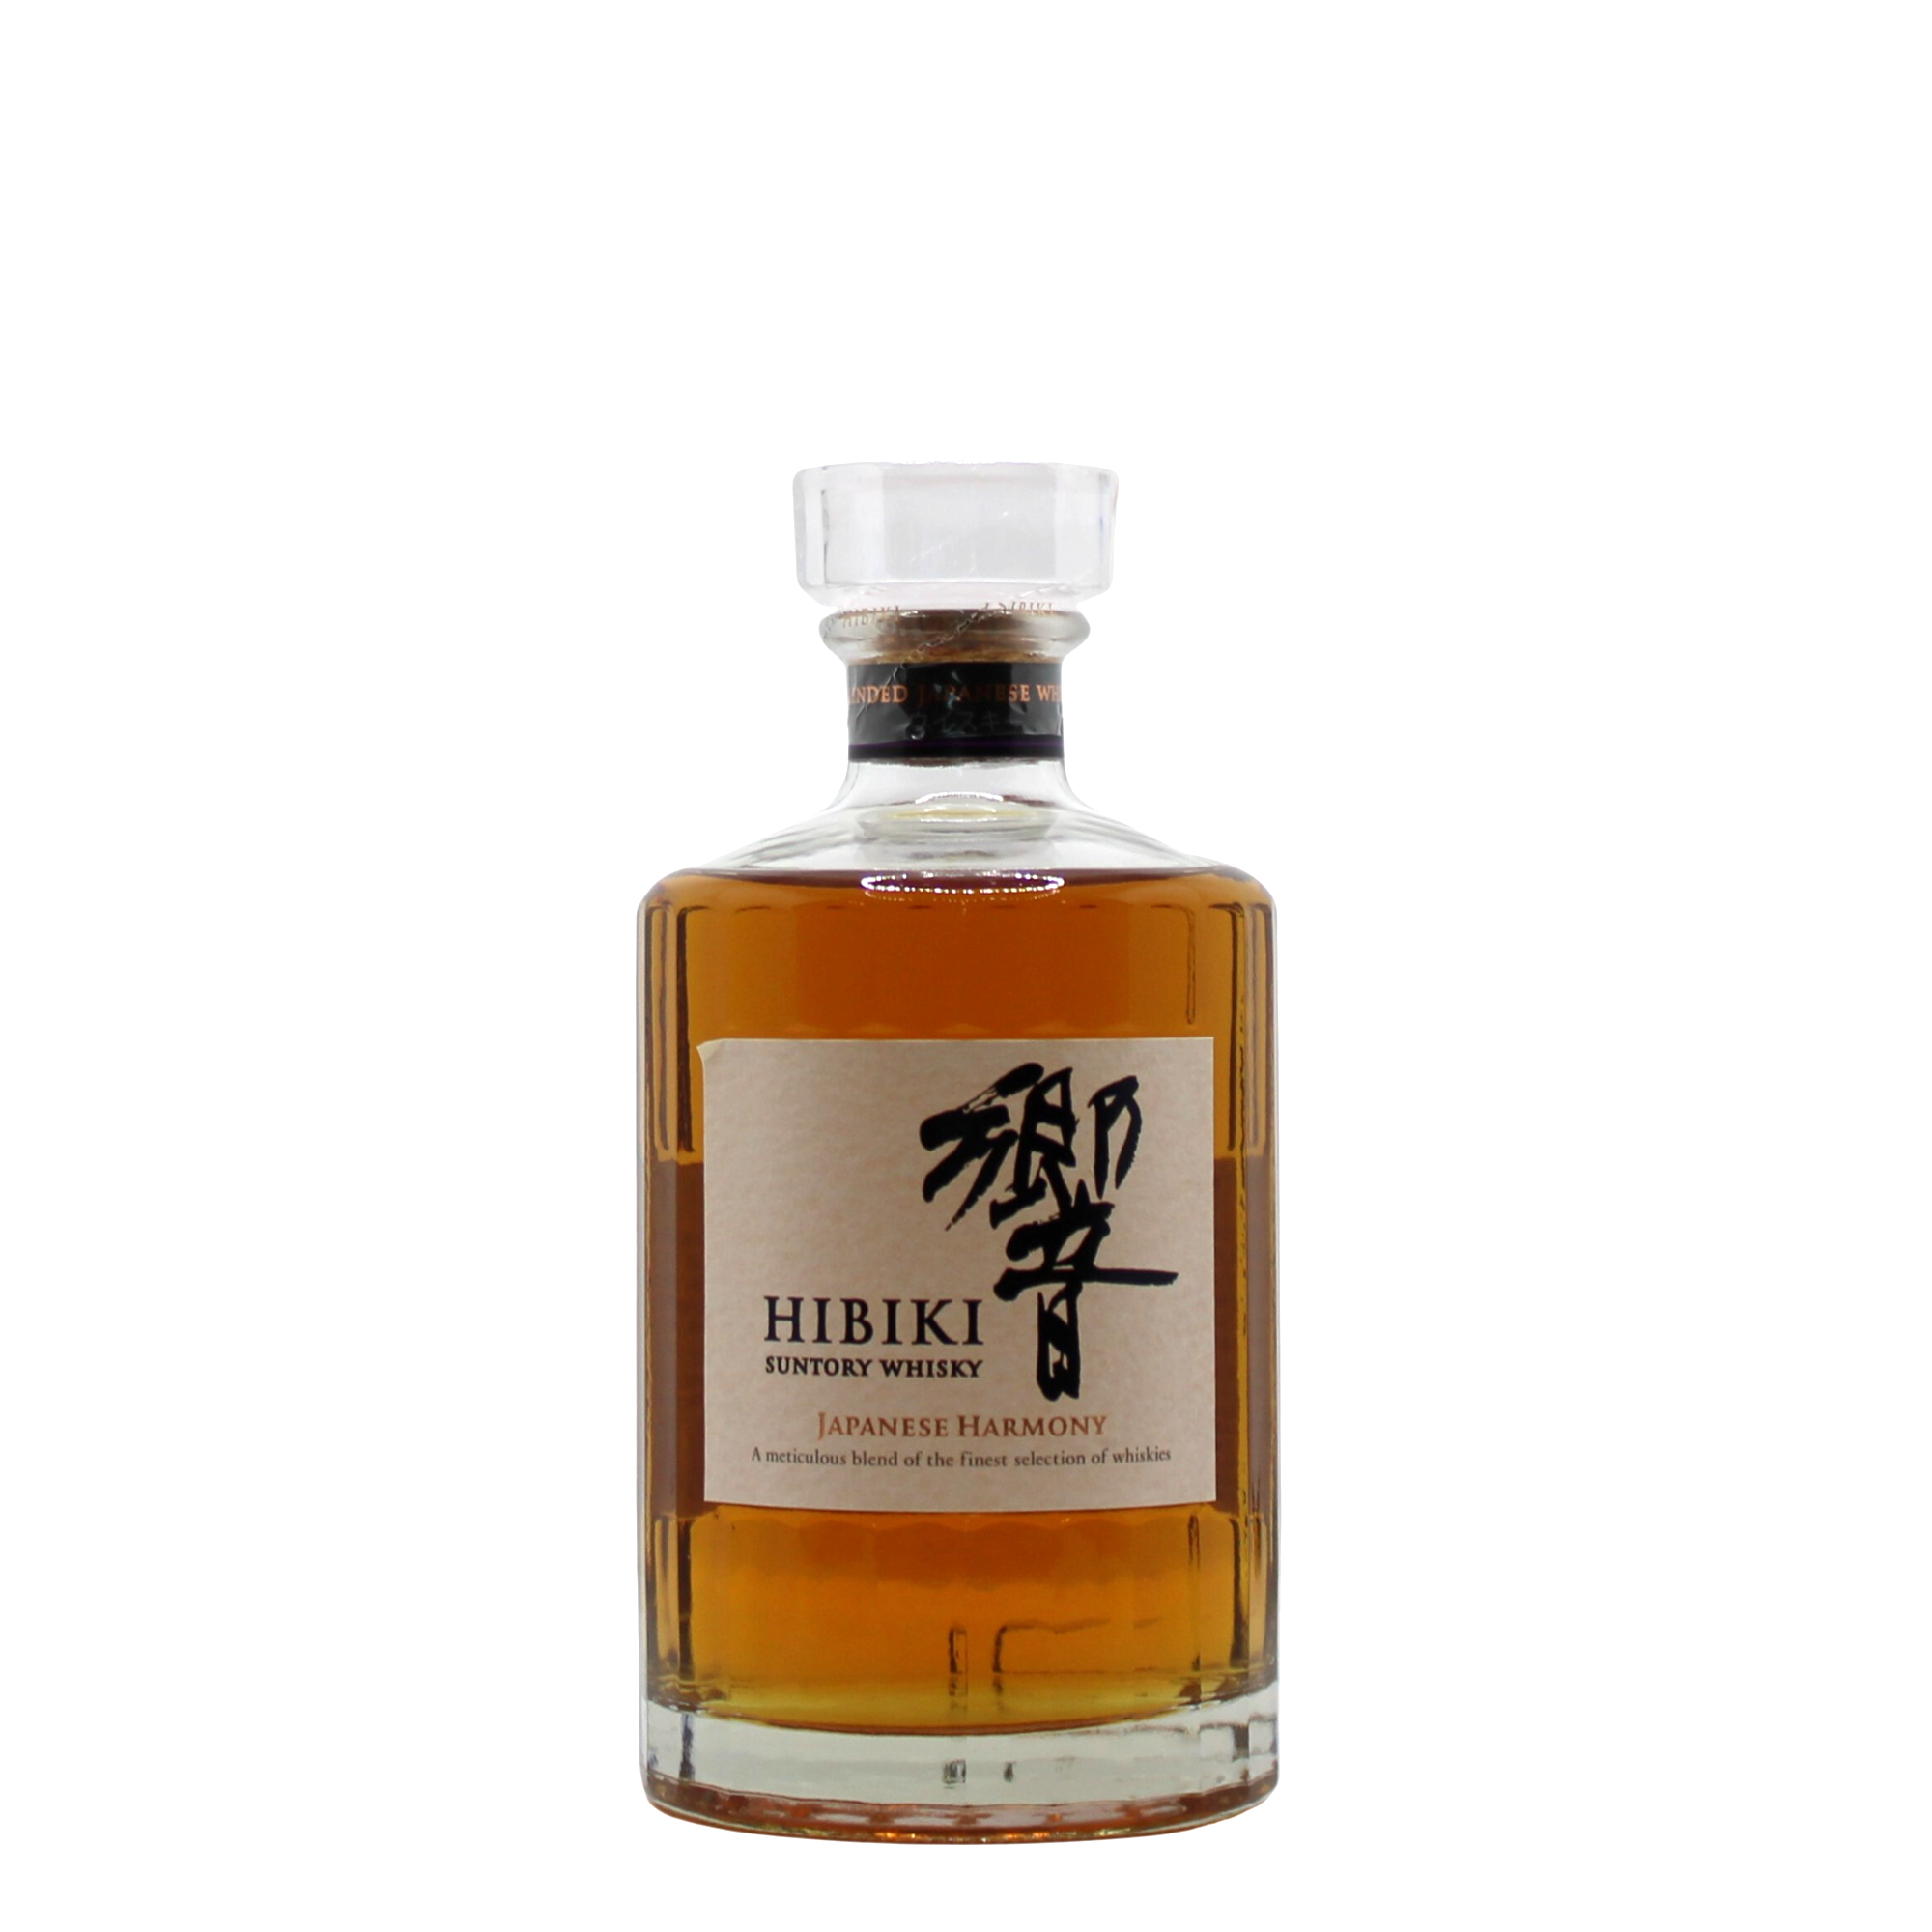 A harmonious blend of Japanese malt and grain whiskies from Yamazaki, Hakushu and Chita presented in the traditional Hibiki 24 faceted bottle.